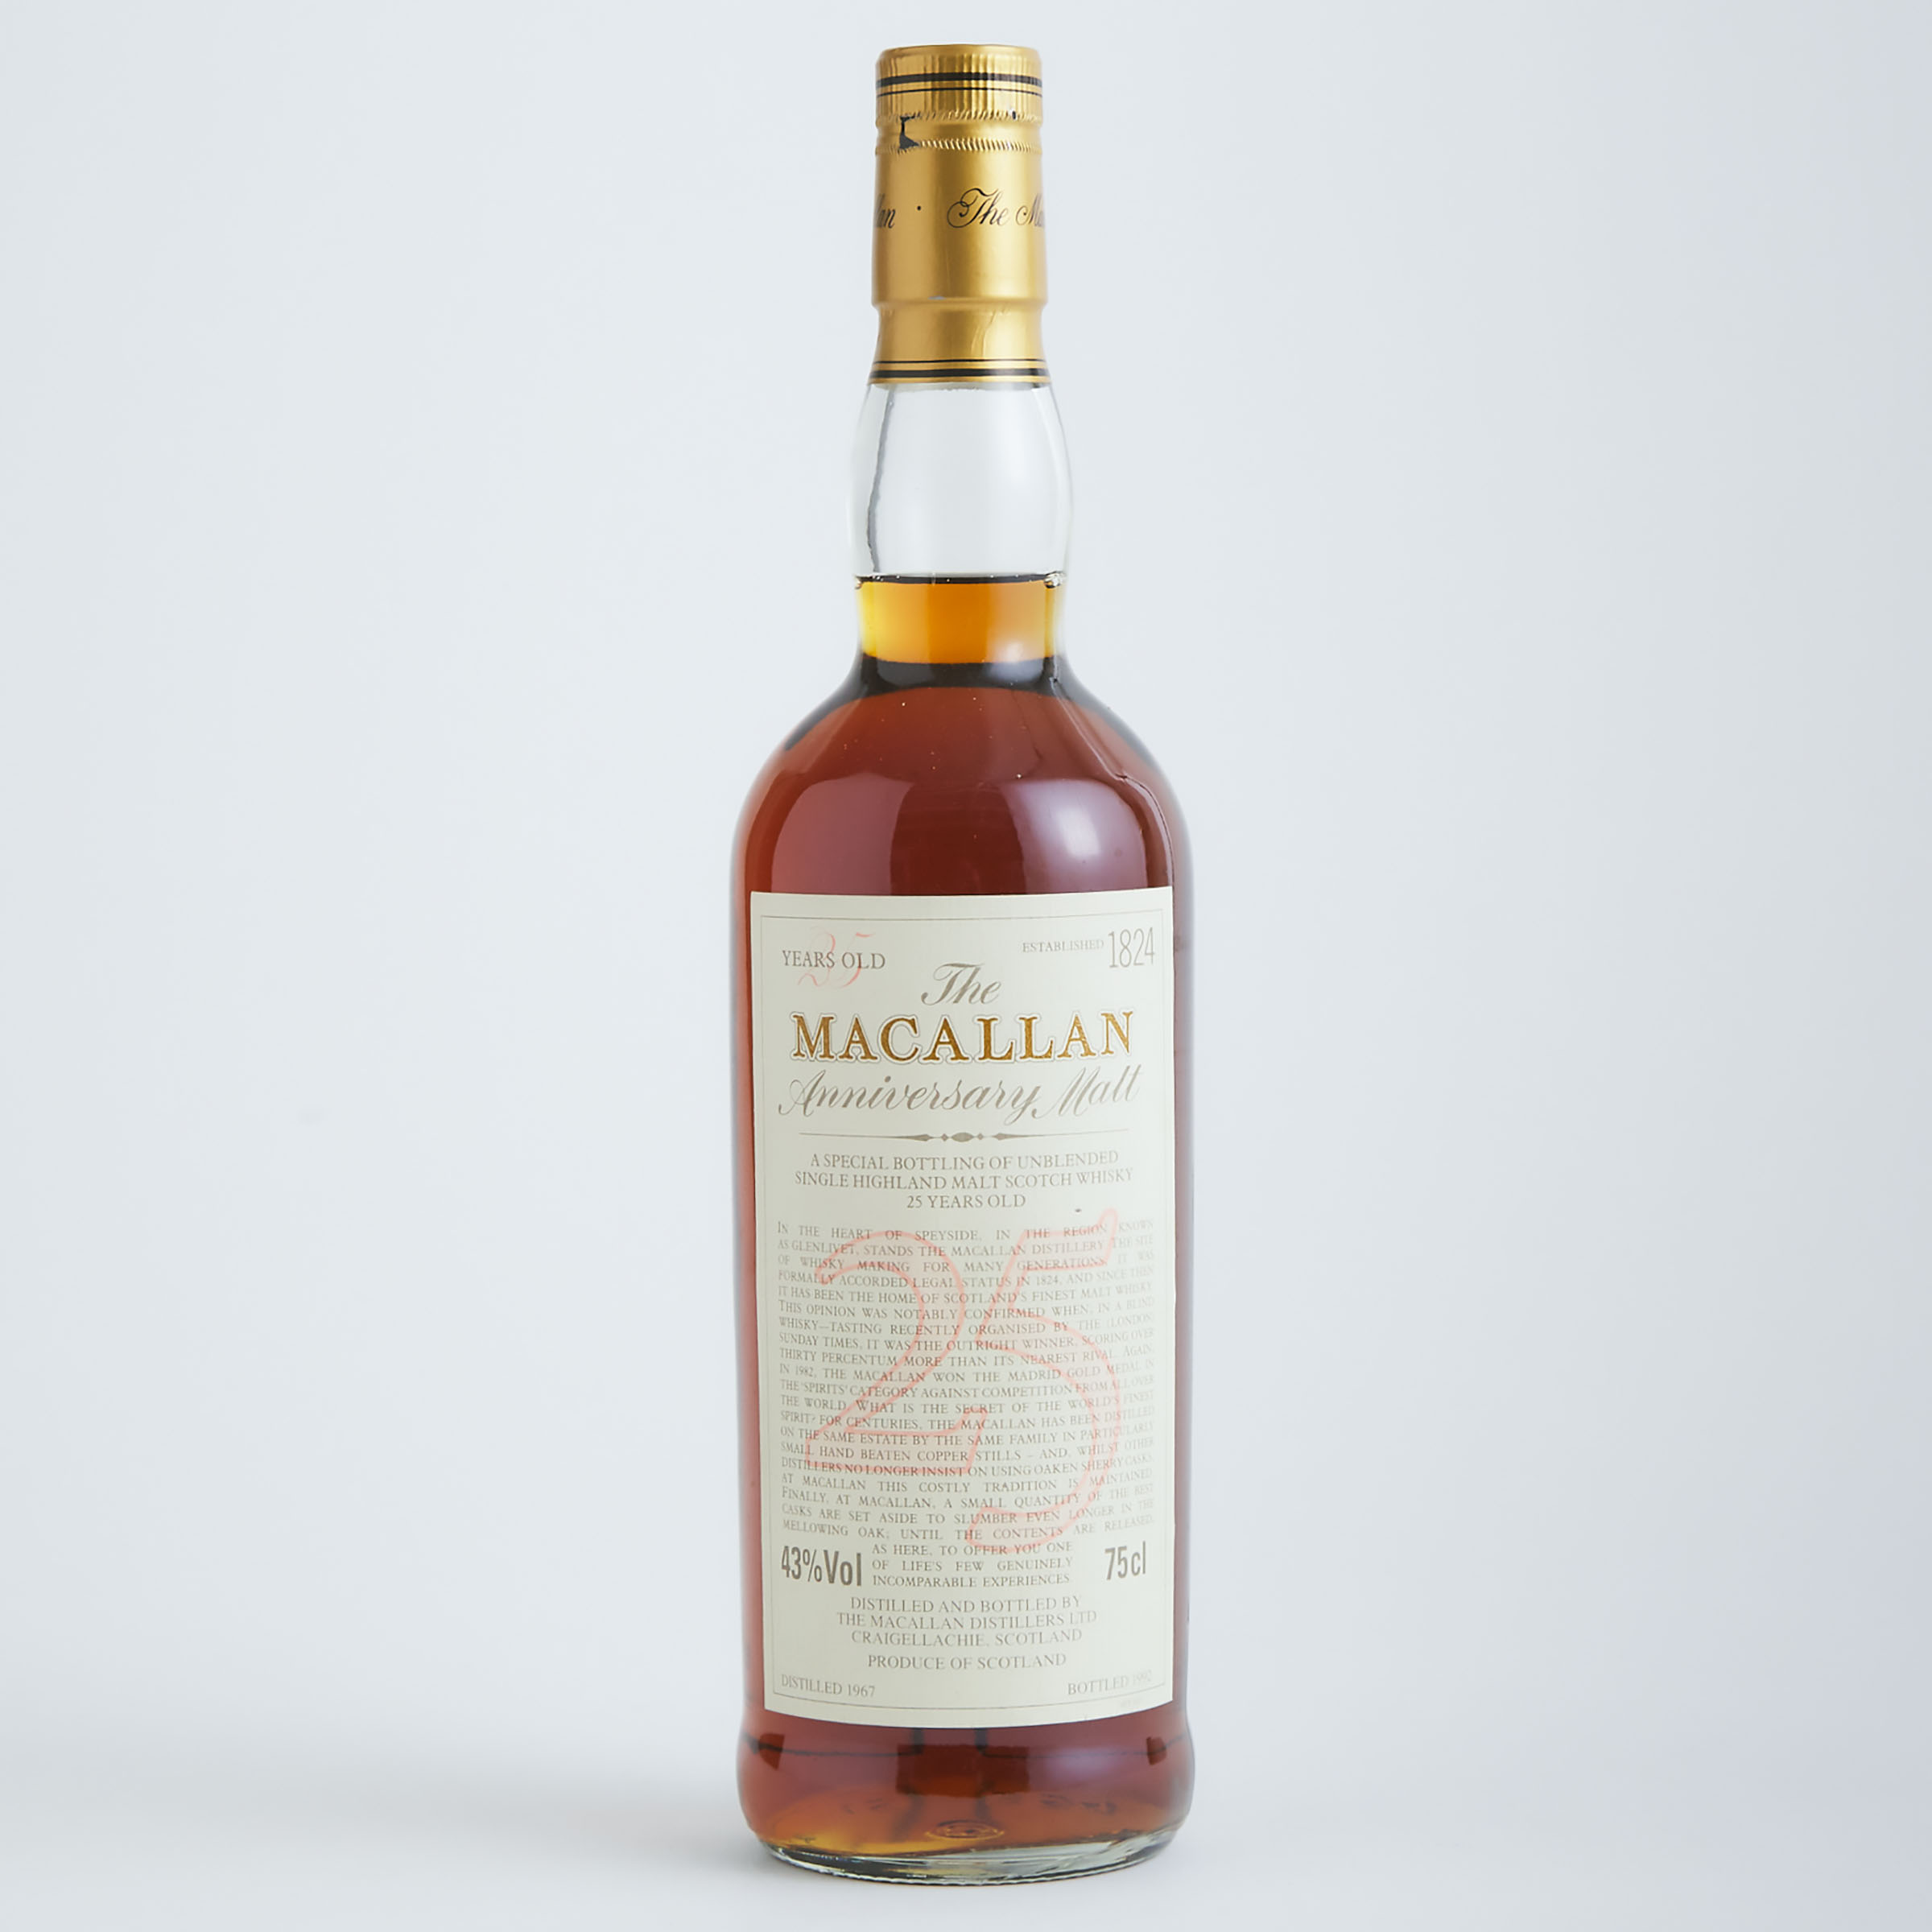 THE MACALLAN 25 YEAR ANNIVERSARY SINGLE HIGHLAND MALT SCOTCH WHISKY 25 YEARS (ONE 75 CL)